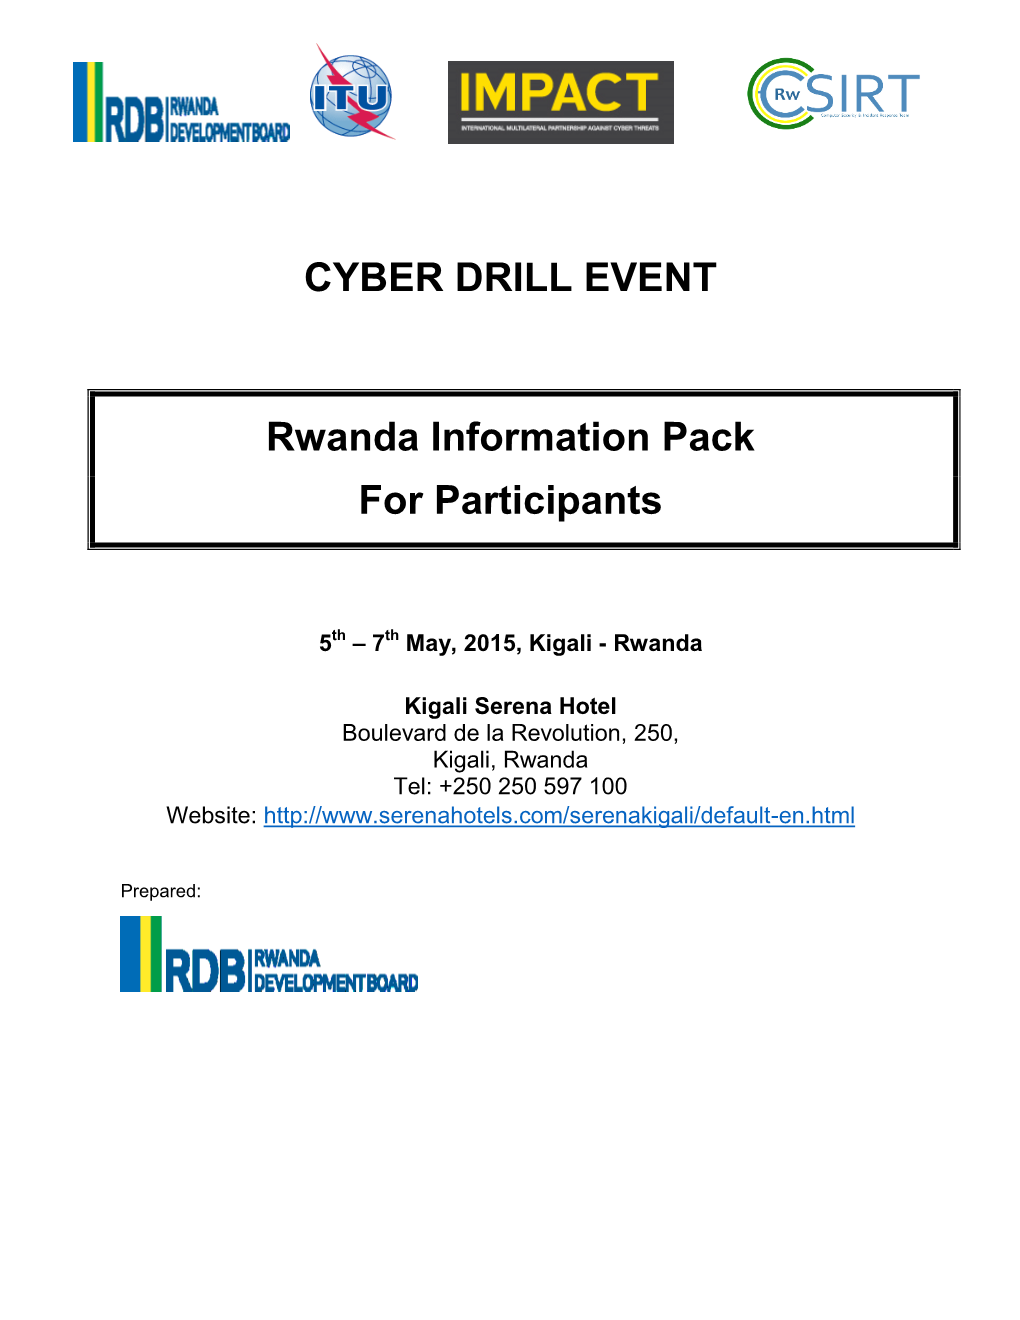 CYBER DRILL EVENT Rwanda Information Pack for Participants